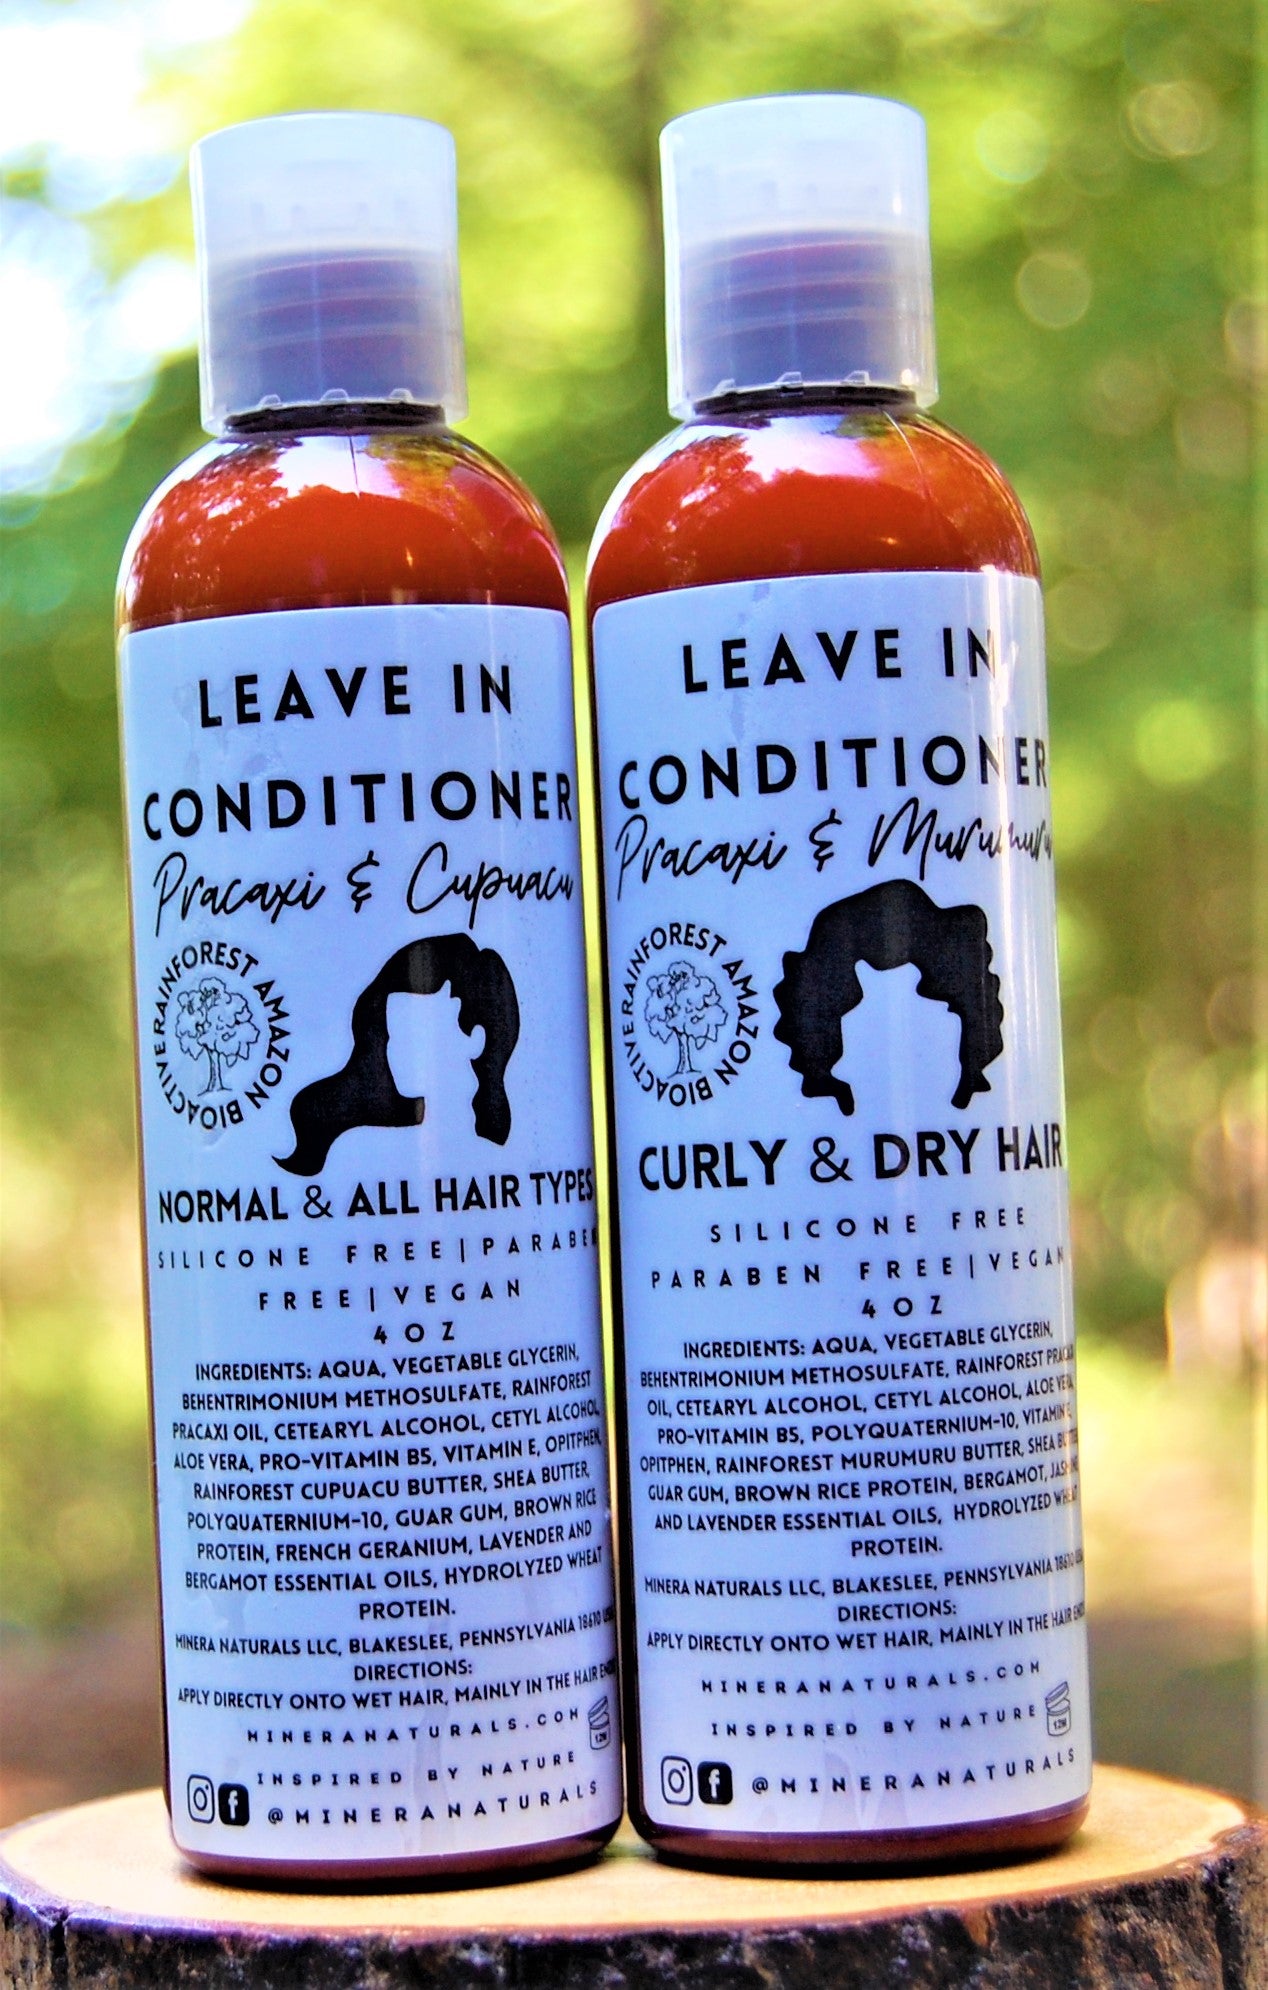 Leave in Conditioner - Normal & All Hair Types